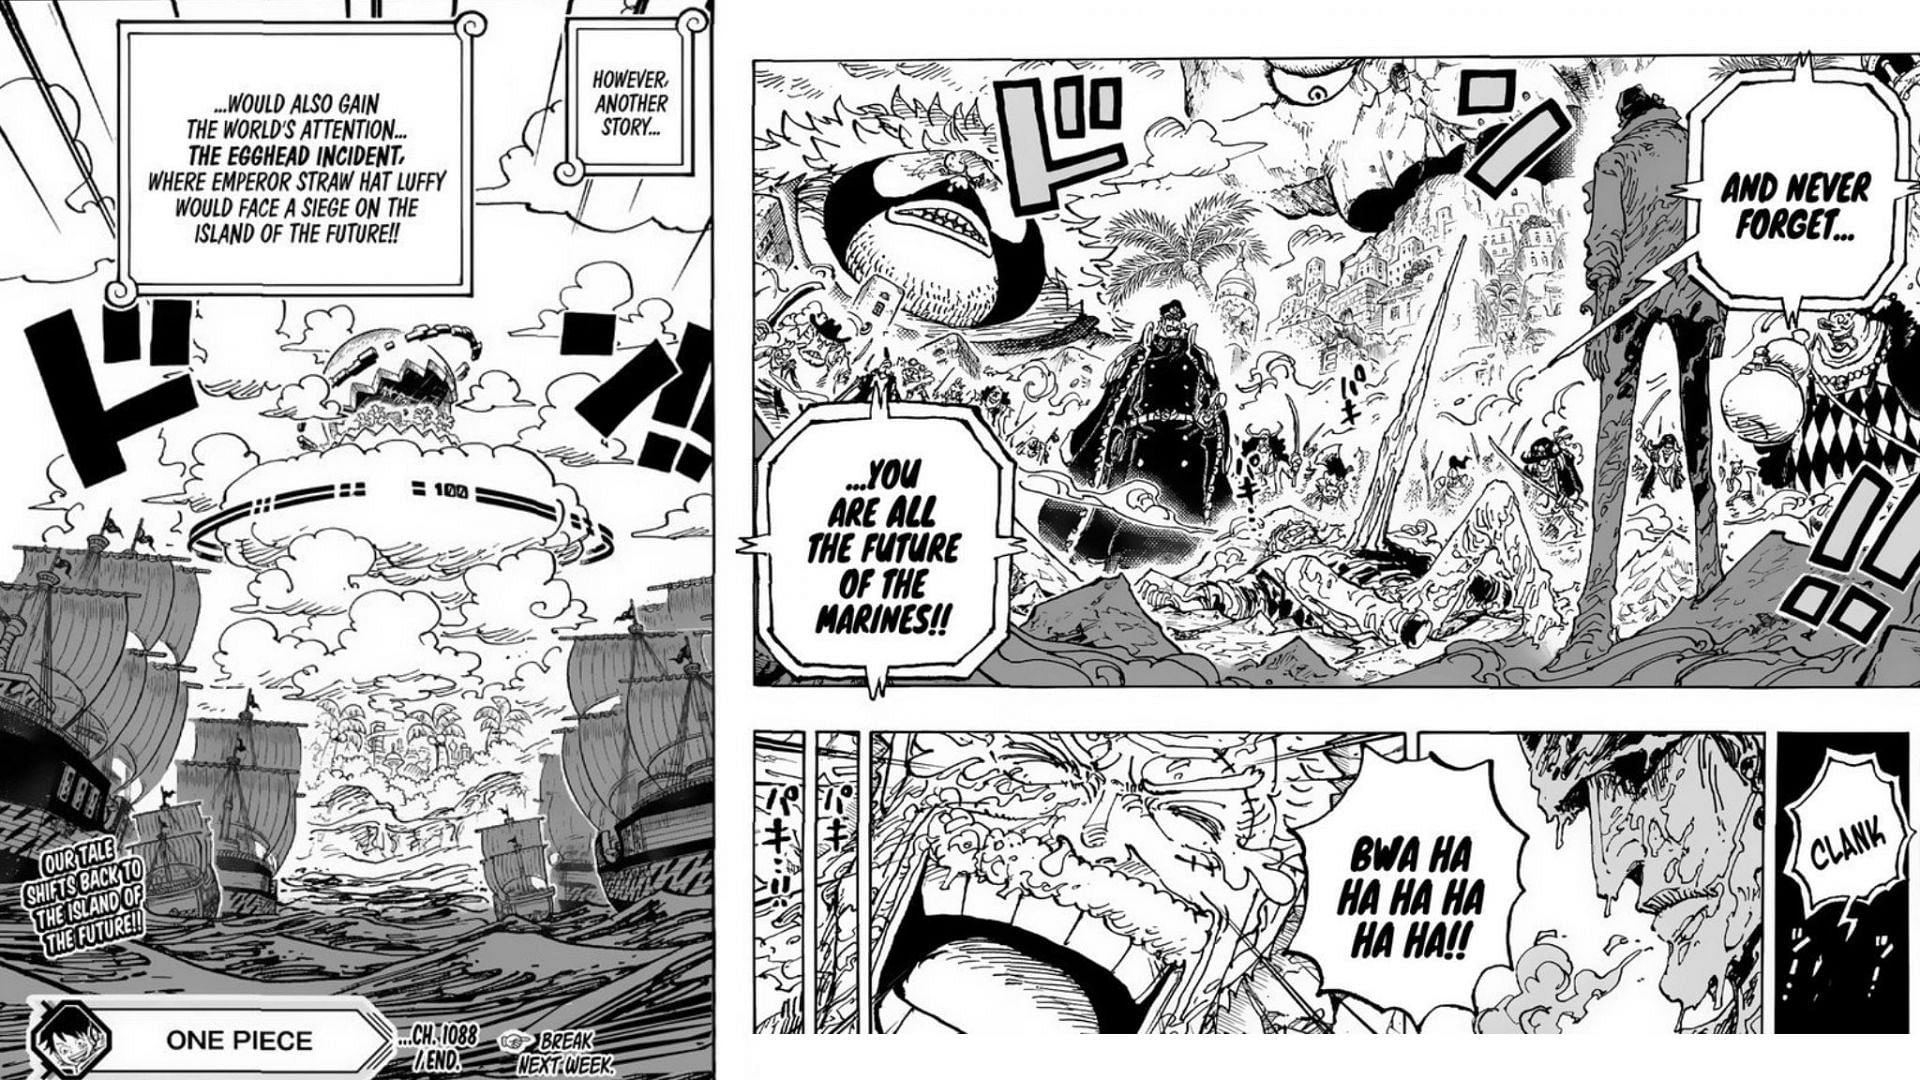 One Piece Chapter 1089 raw scans: Garp and Luffy's antics shock the world  as Egghead is invaded and natural disasters strike